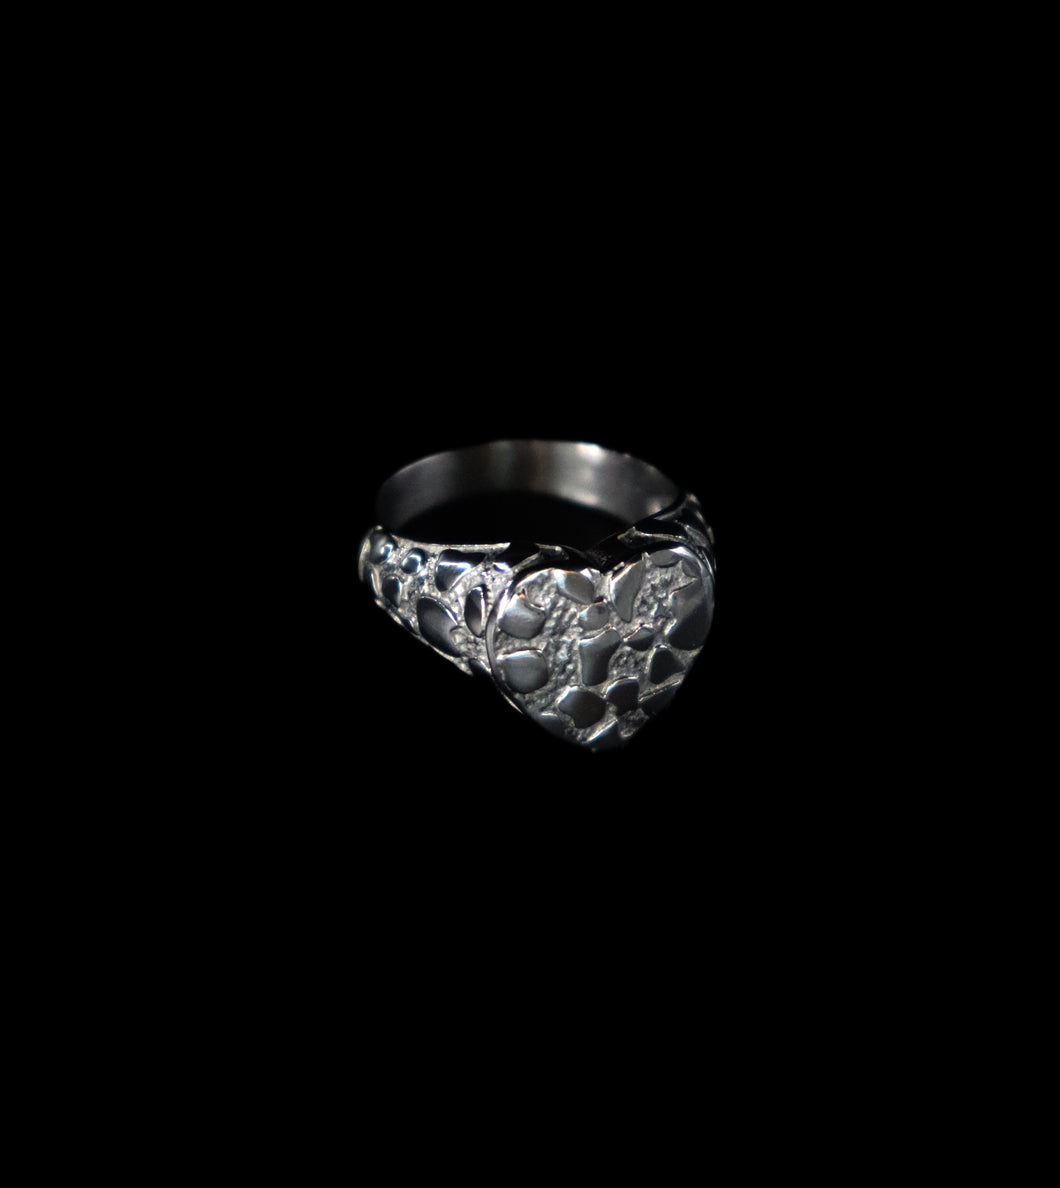 Destroyed Love Ring - Fashion Jewelry by Yordy.